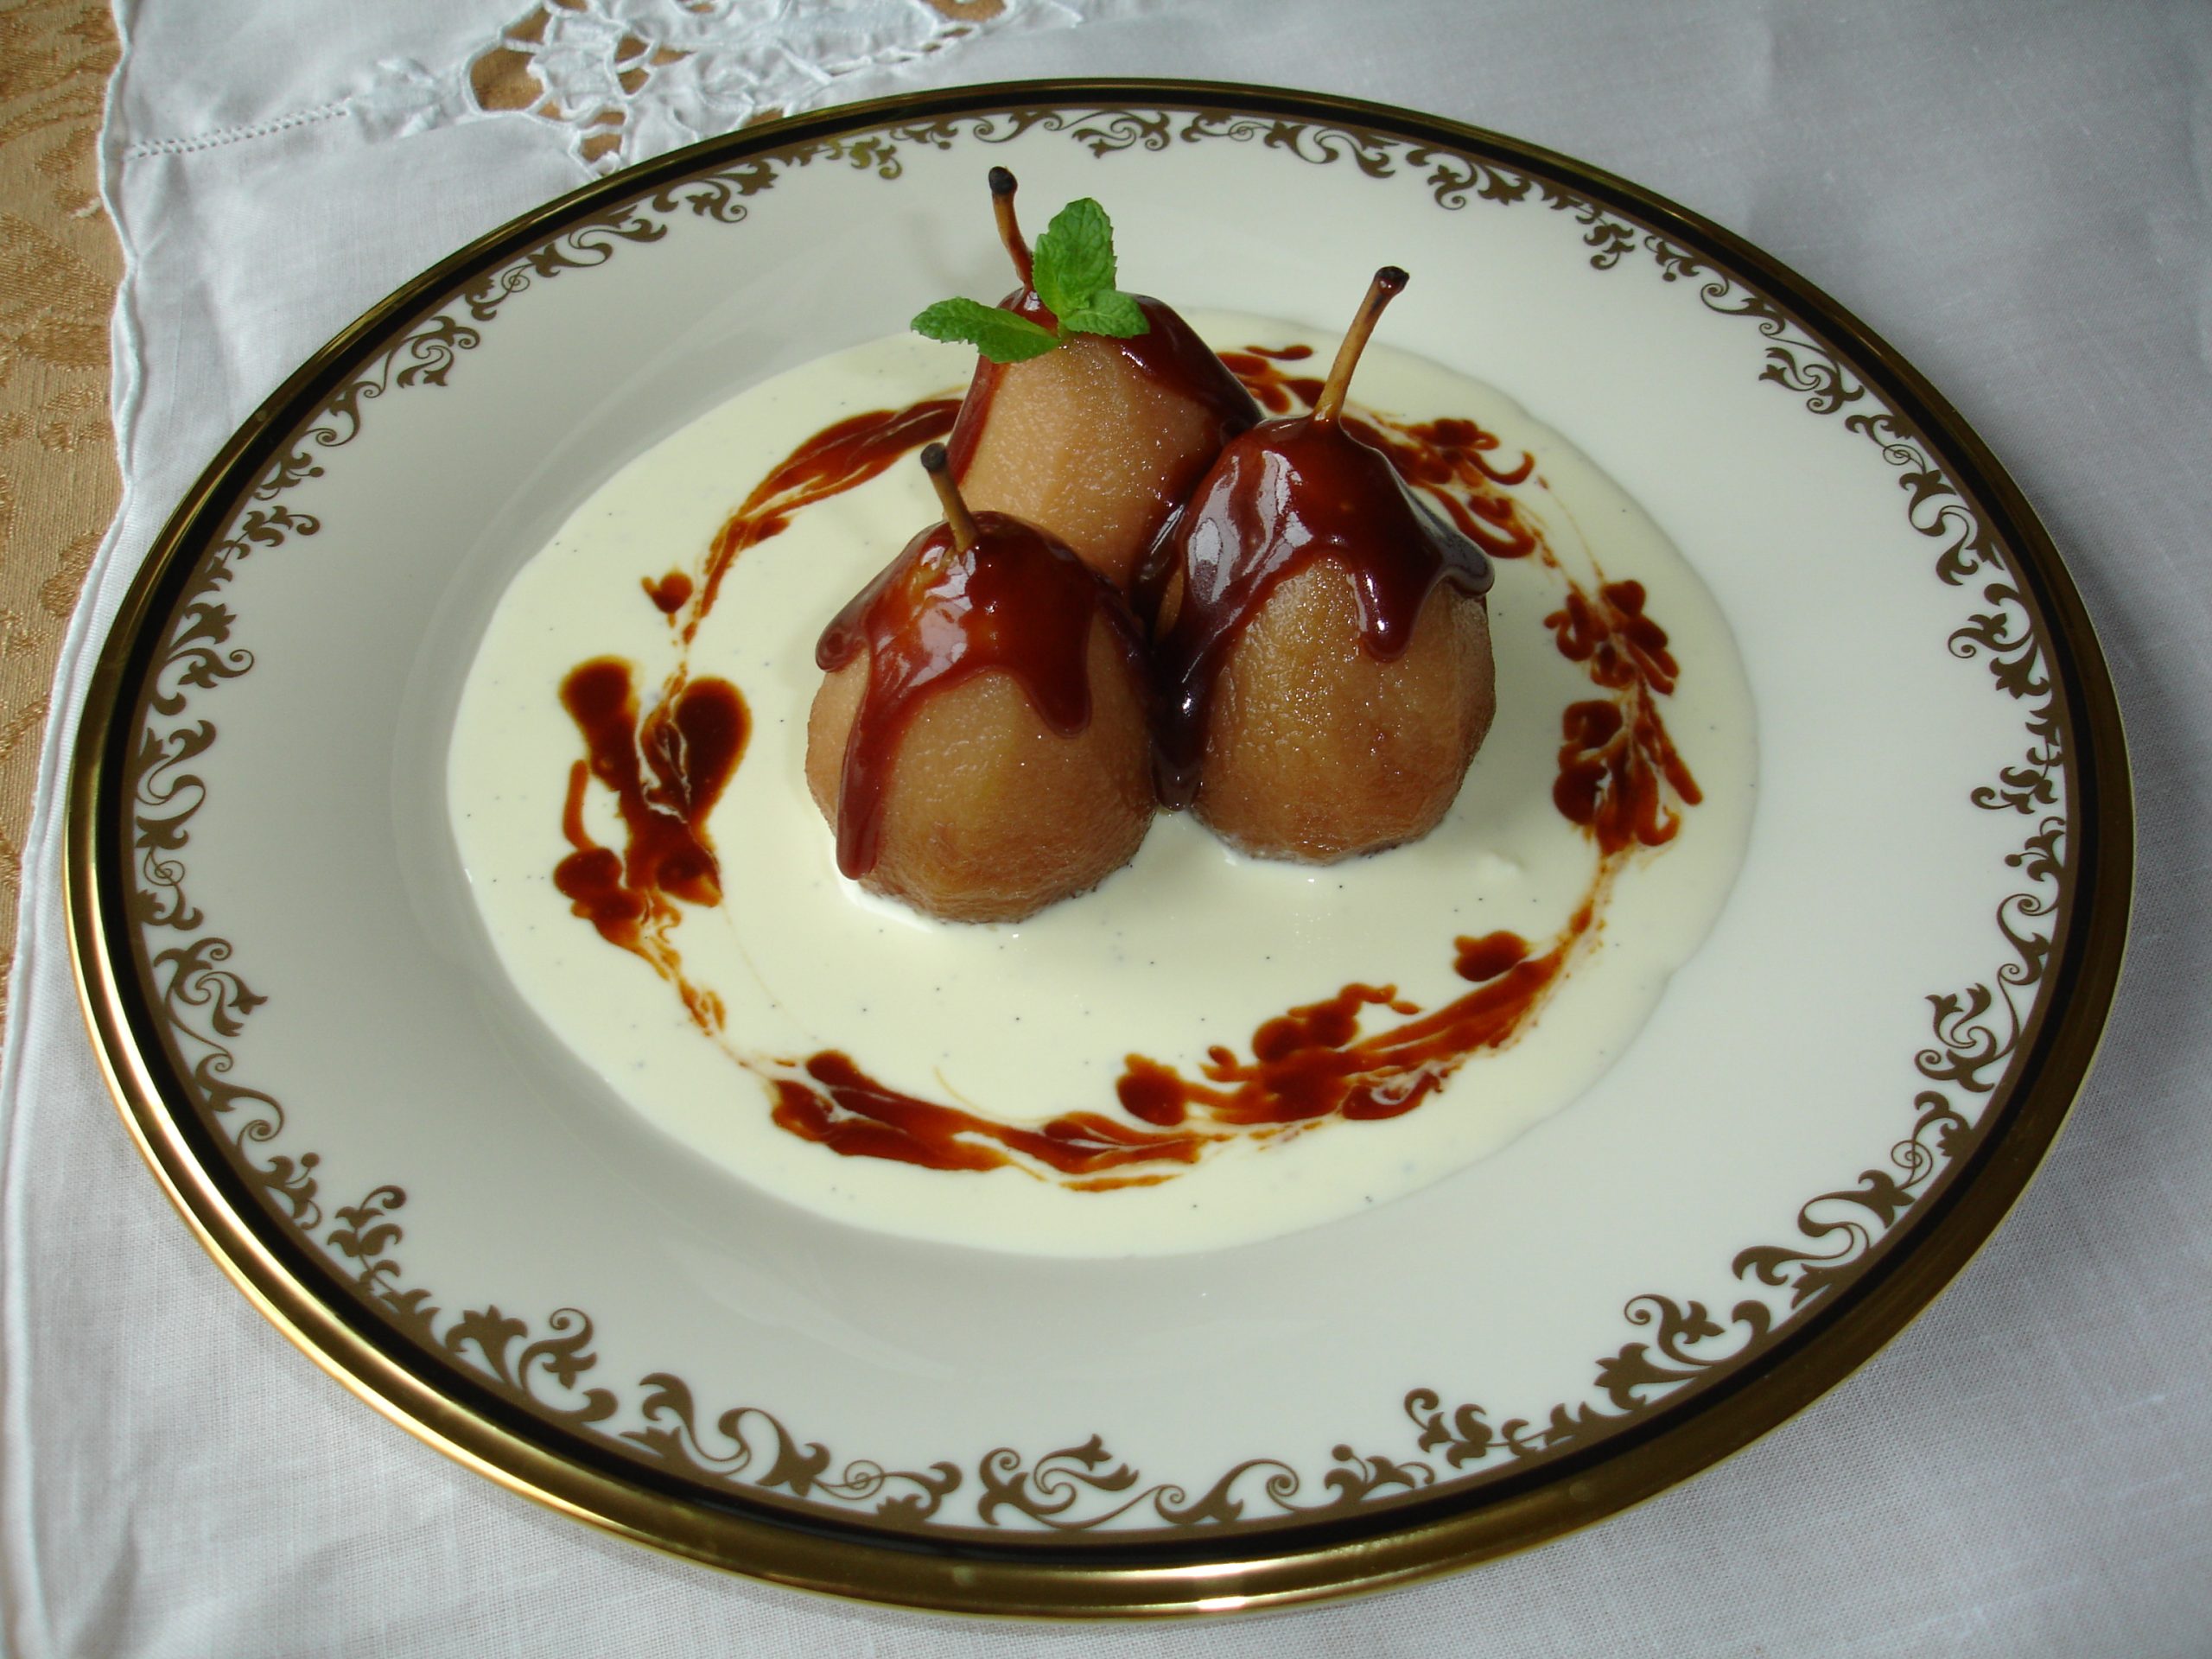 Poached Pears with Ginger Crème Anglaise and Caramel Sauces